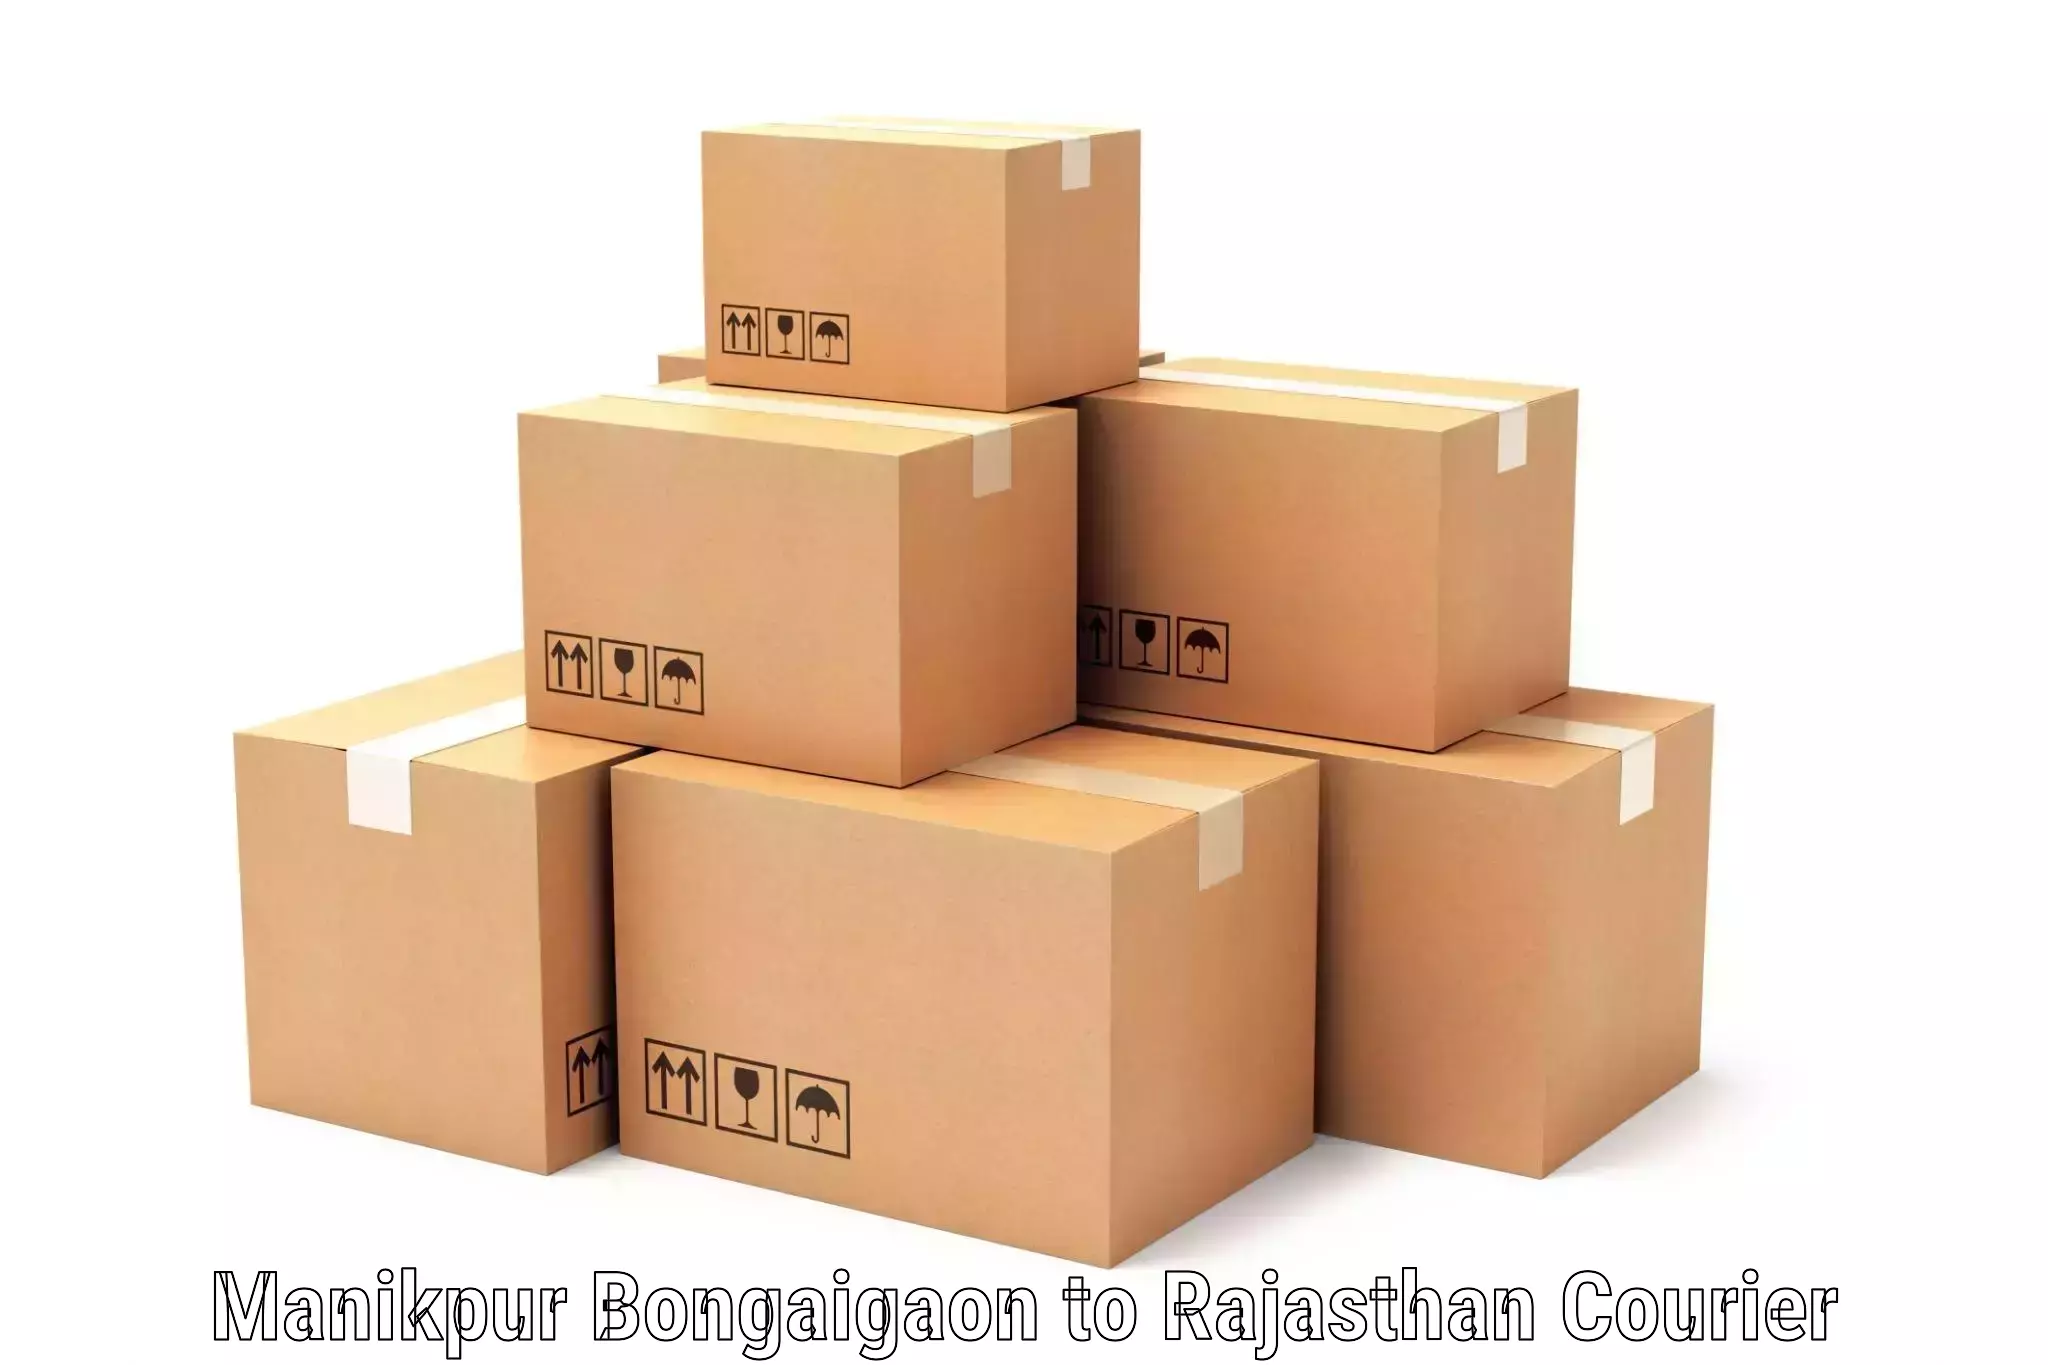 Reliable freight solutions Manikpur Bongaigaon to Rajasthan